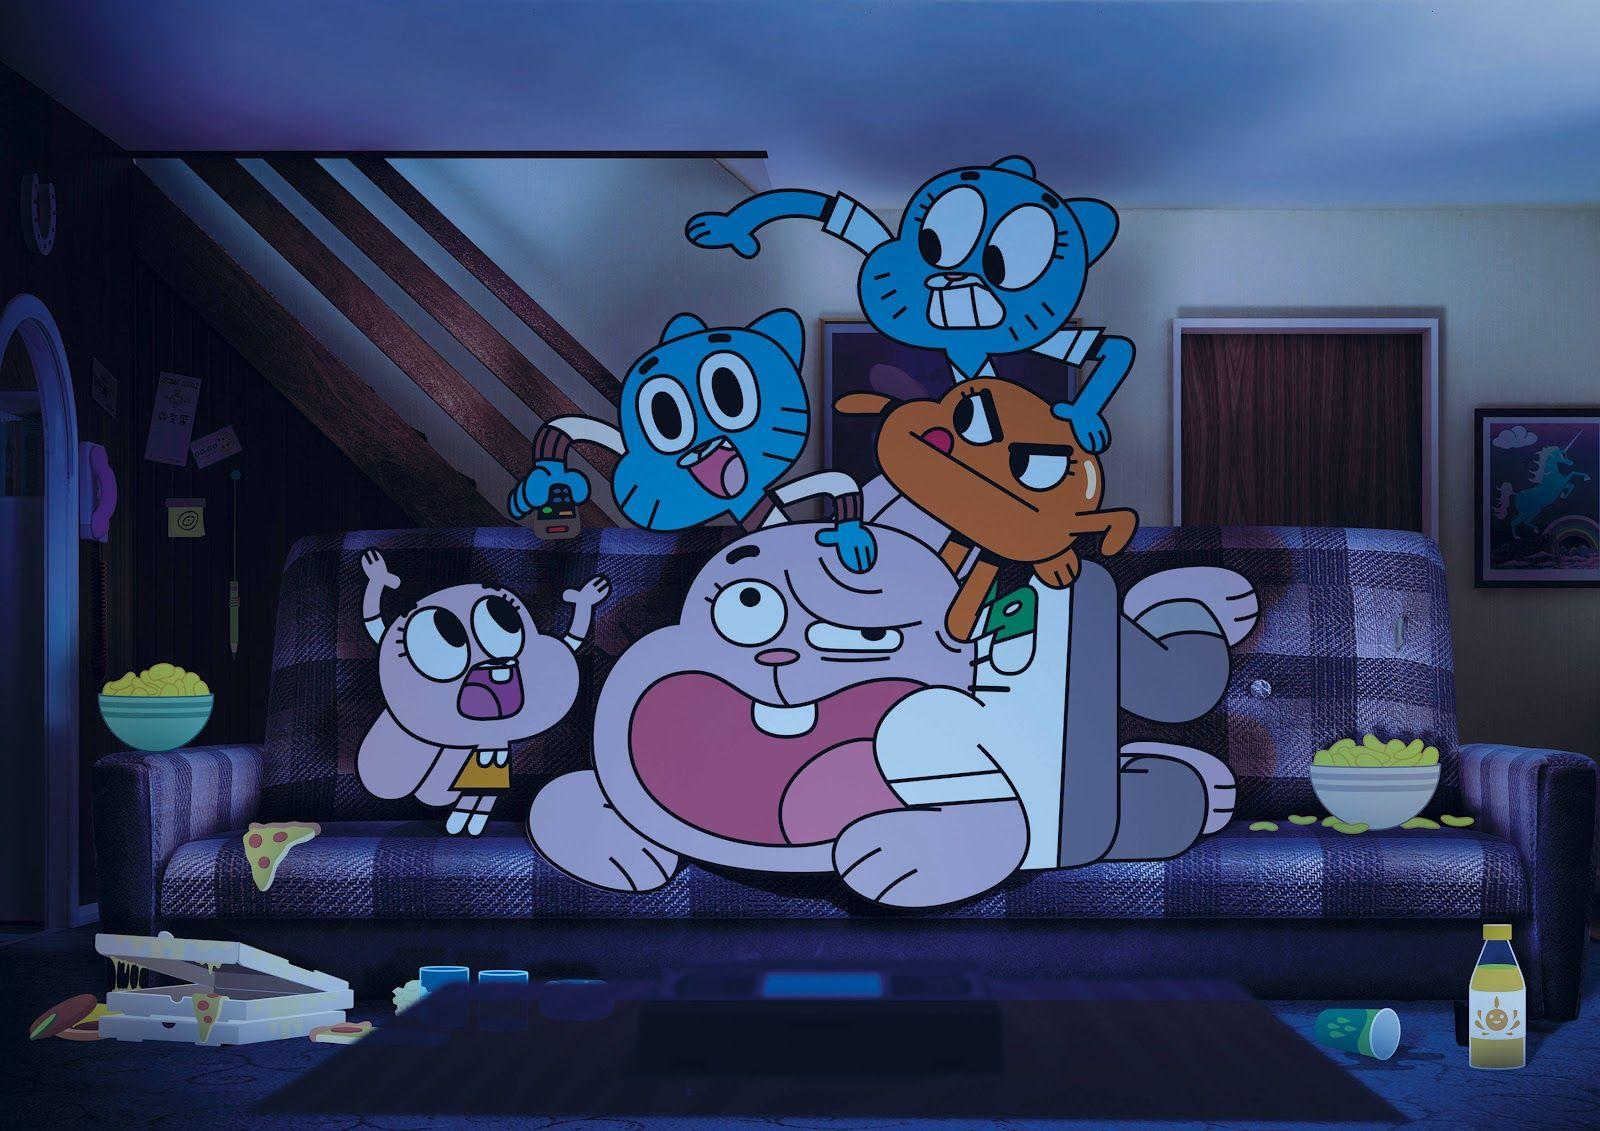 Things To Do In Los Angeles: The Amazing World of Gumball Back